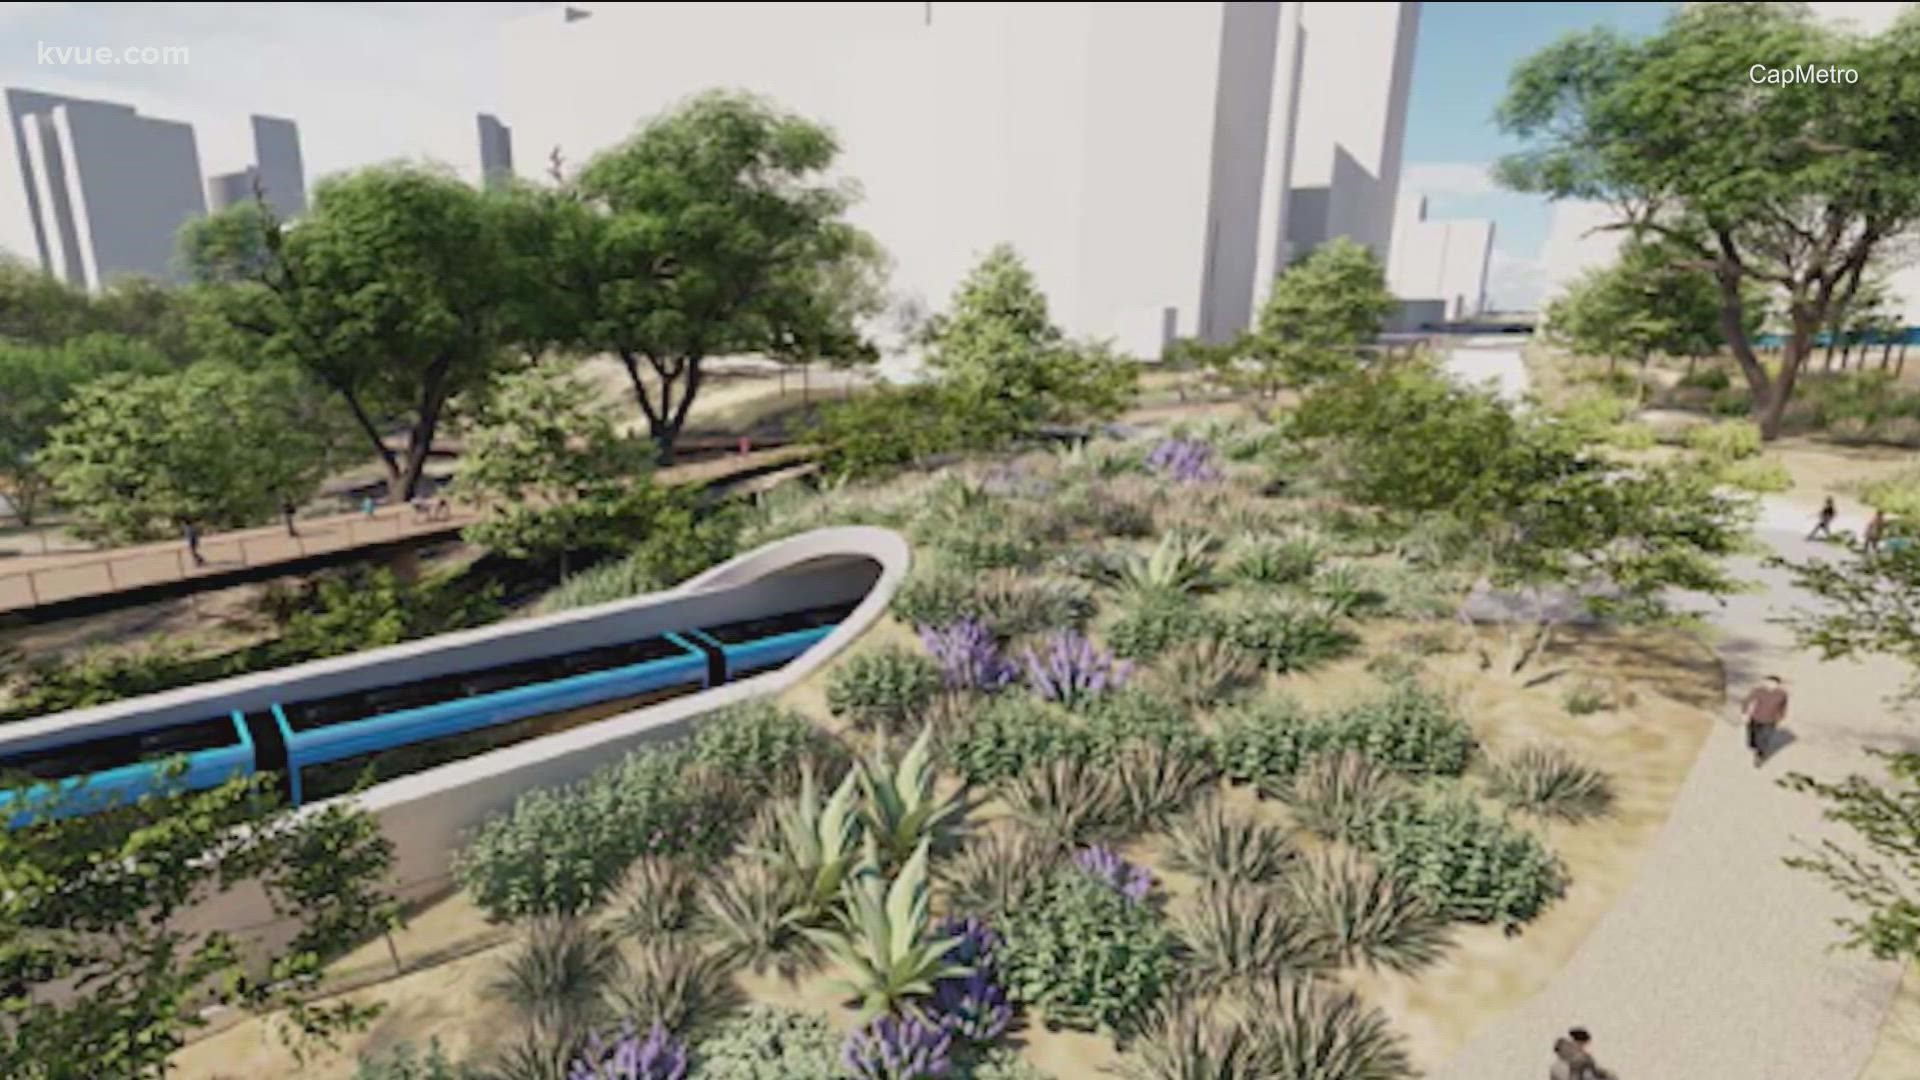 We're getting a first look at the Capital Metro Blue Line light rail and how it could look through Downtown Austin. KVUE's Bryce Newberry has the details.